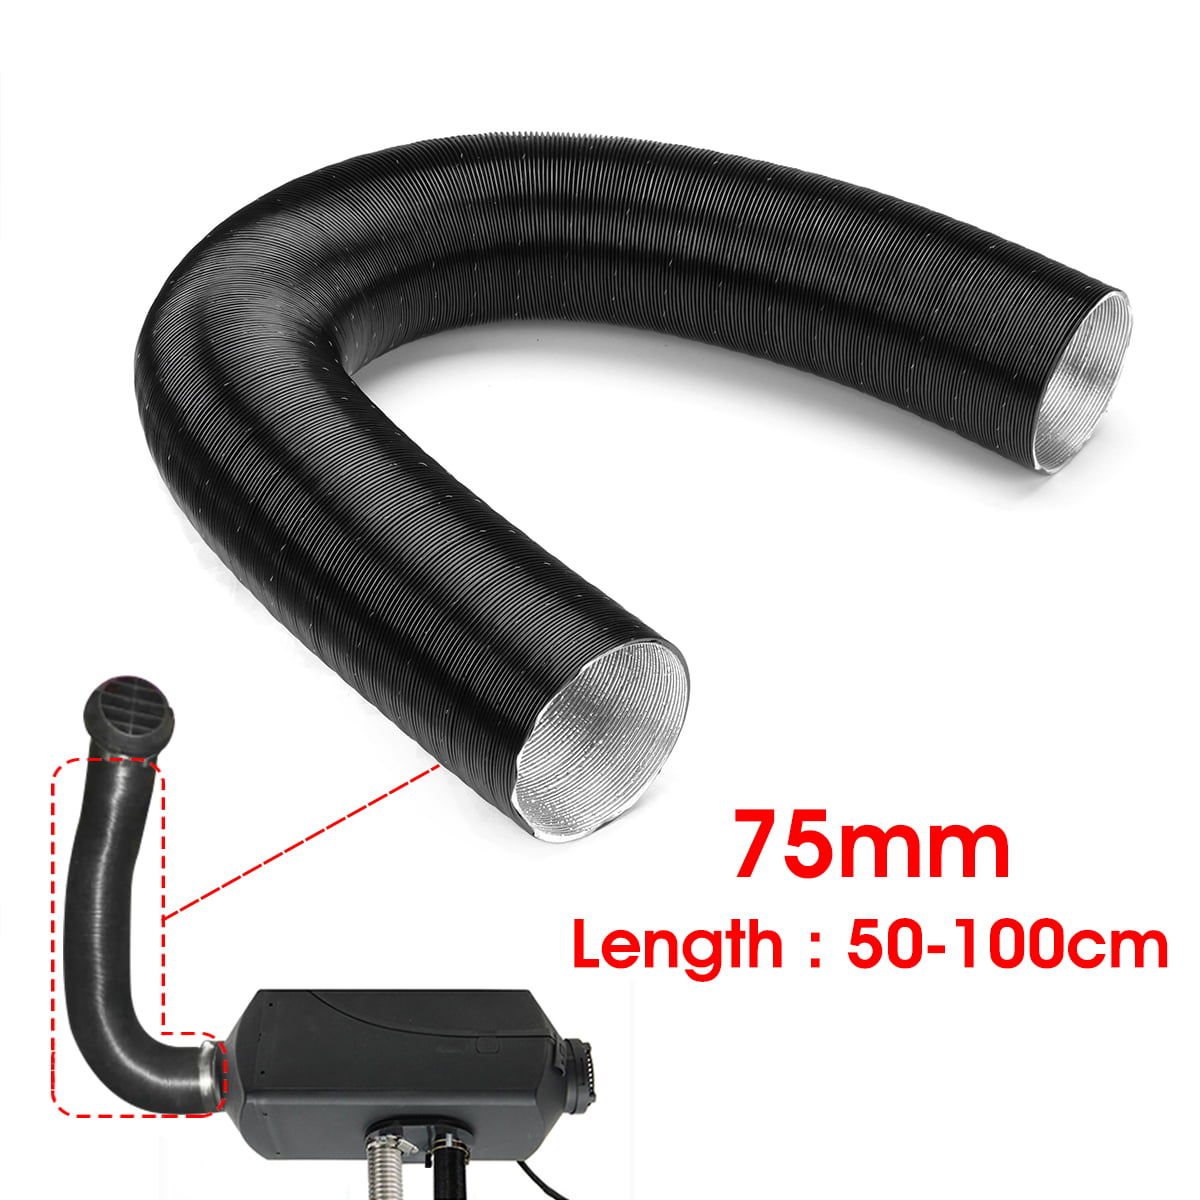 Superior Diesel Heater Hose Flexible Air Ducting Hot Warm Transfer Pipe Hose 